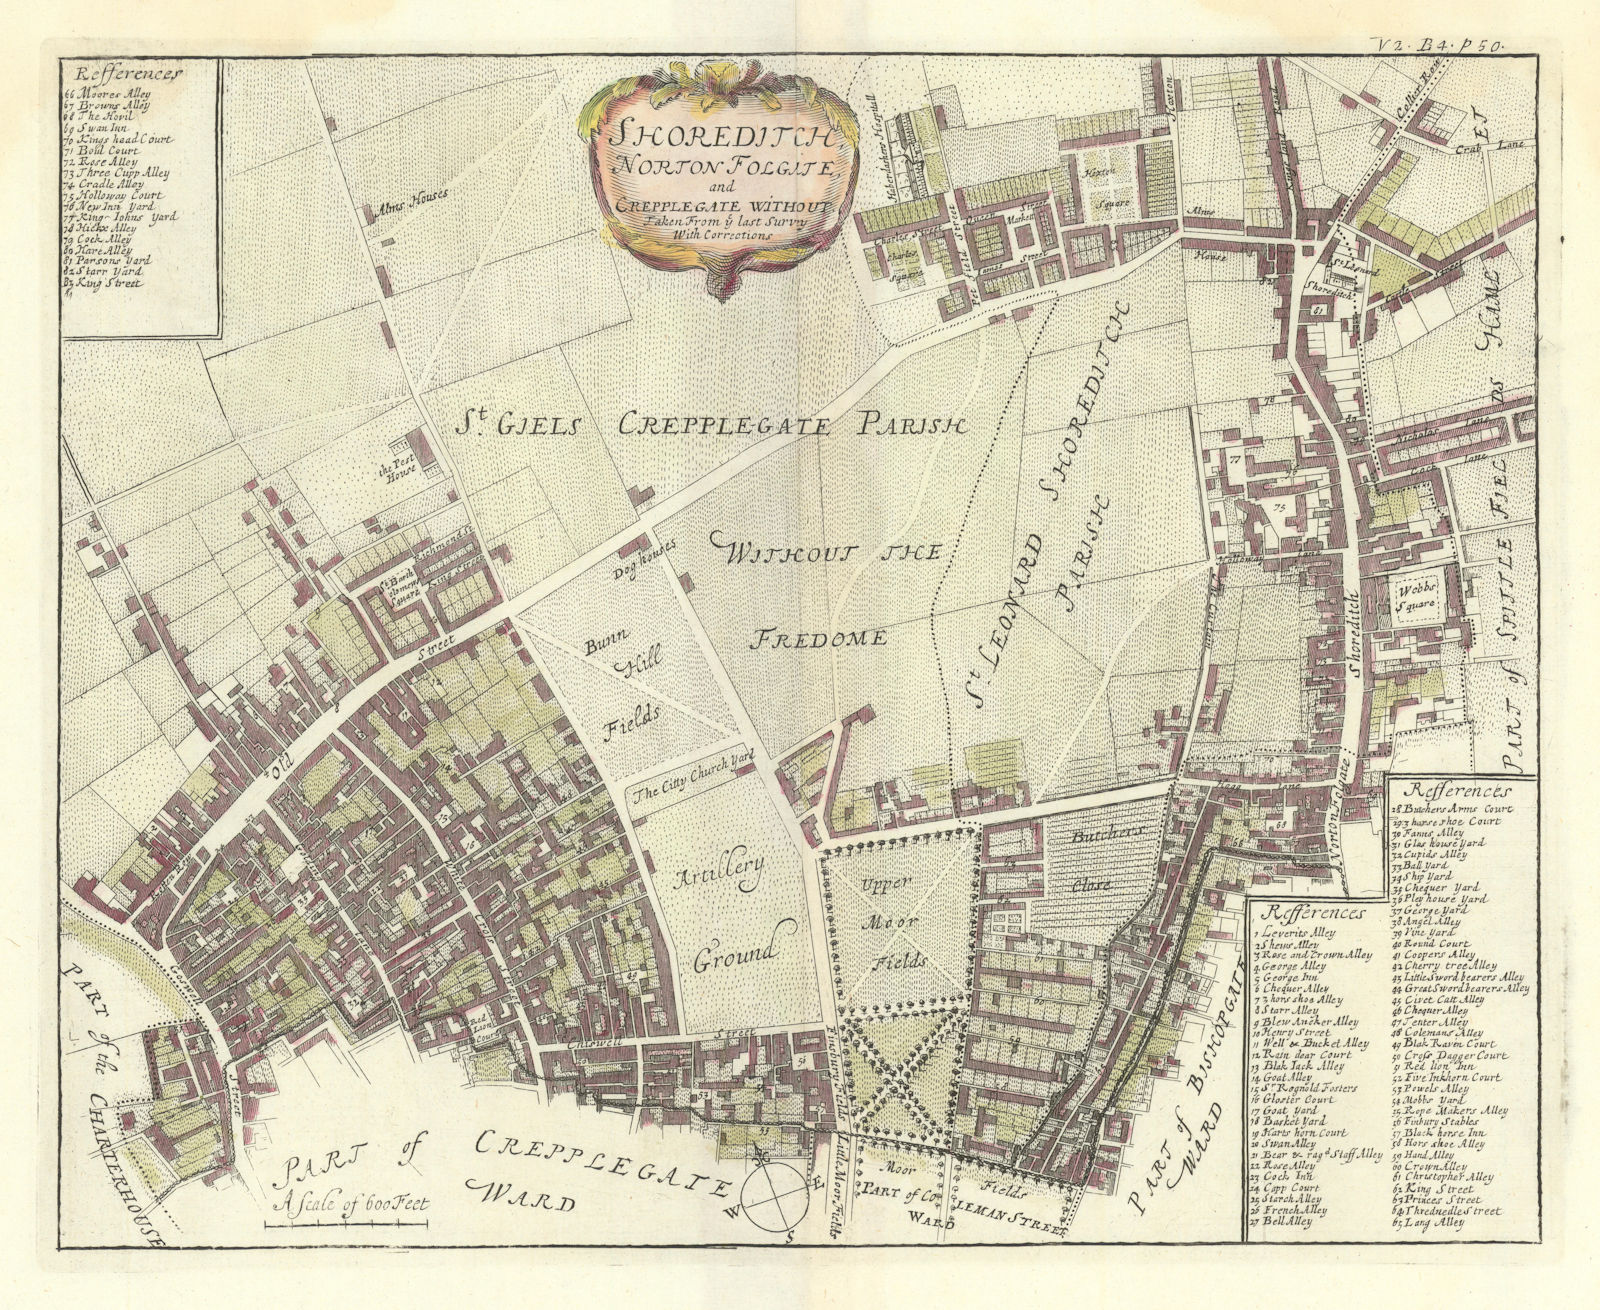 Associate Product Shoreditch, Norton Folgate & Cripplegate Without. Hoxton. STOW/STRYPE 1720 map